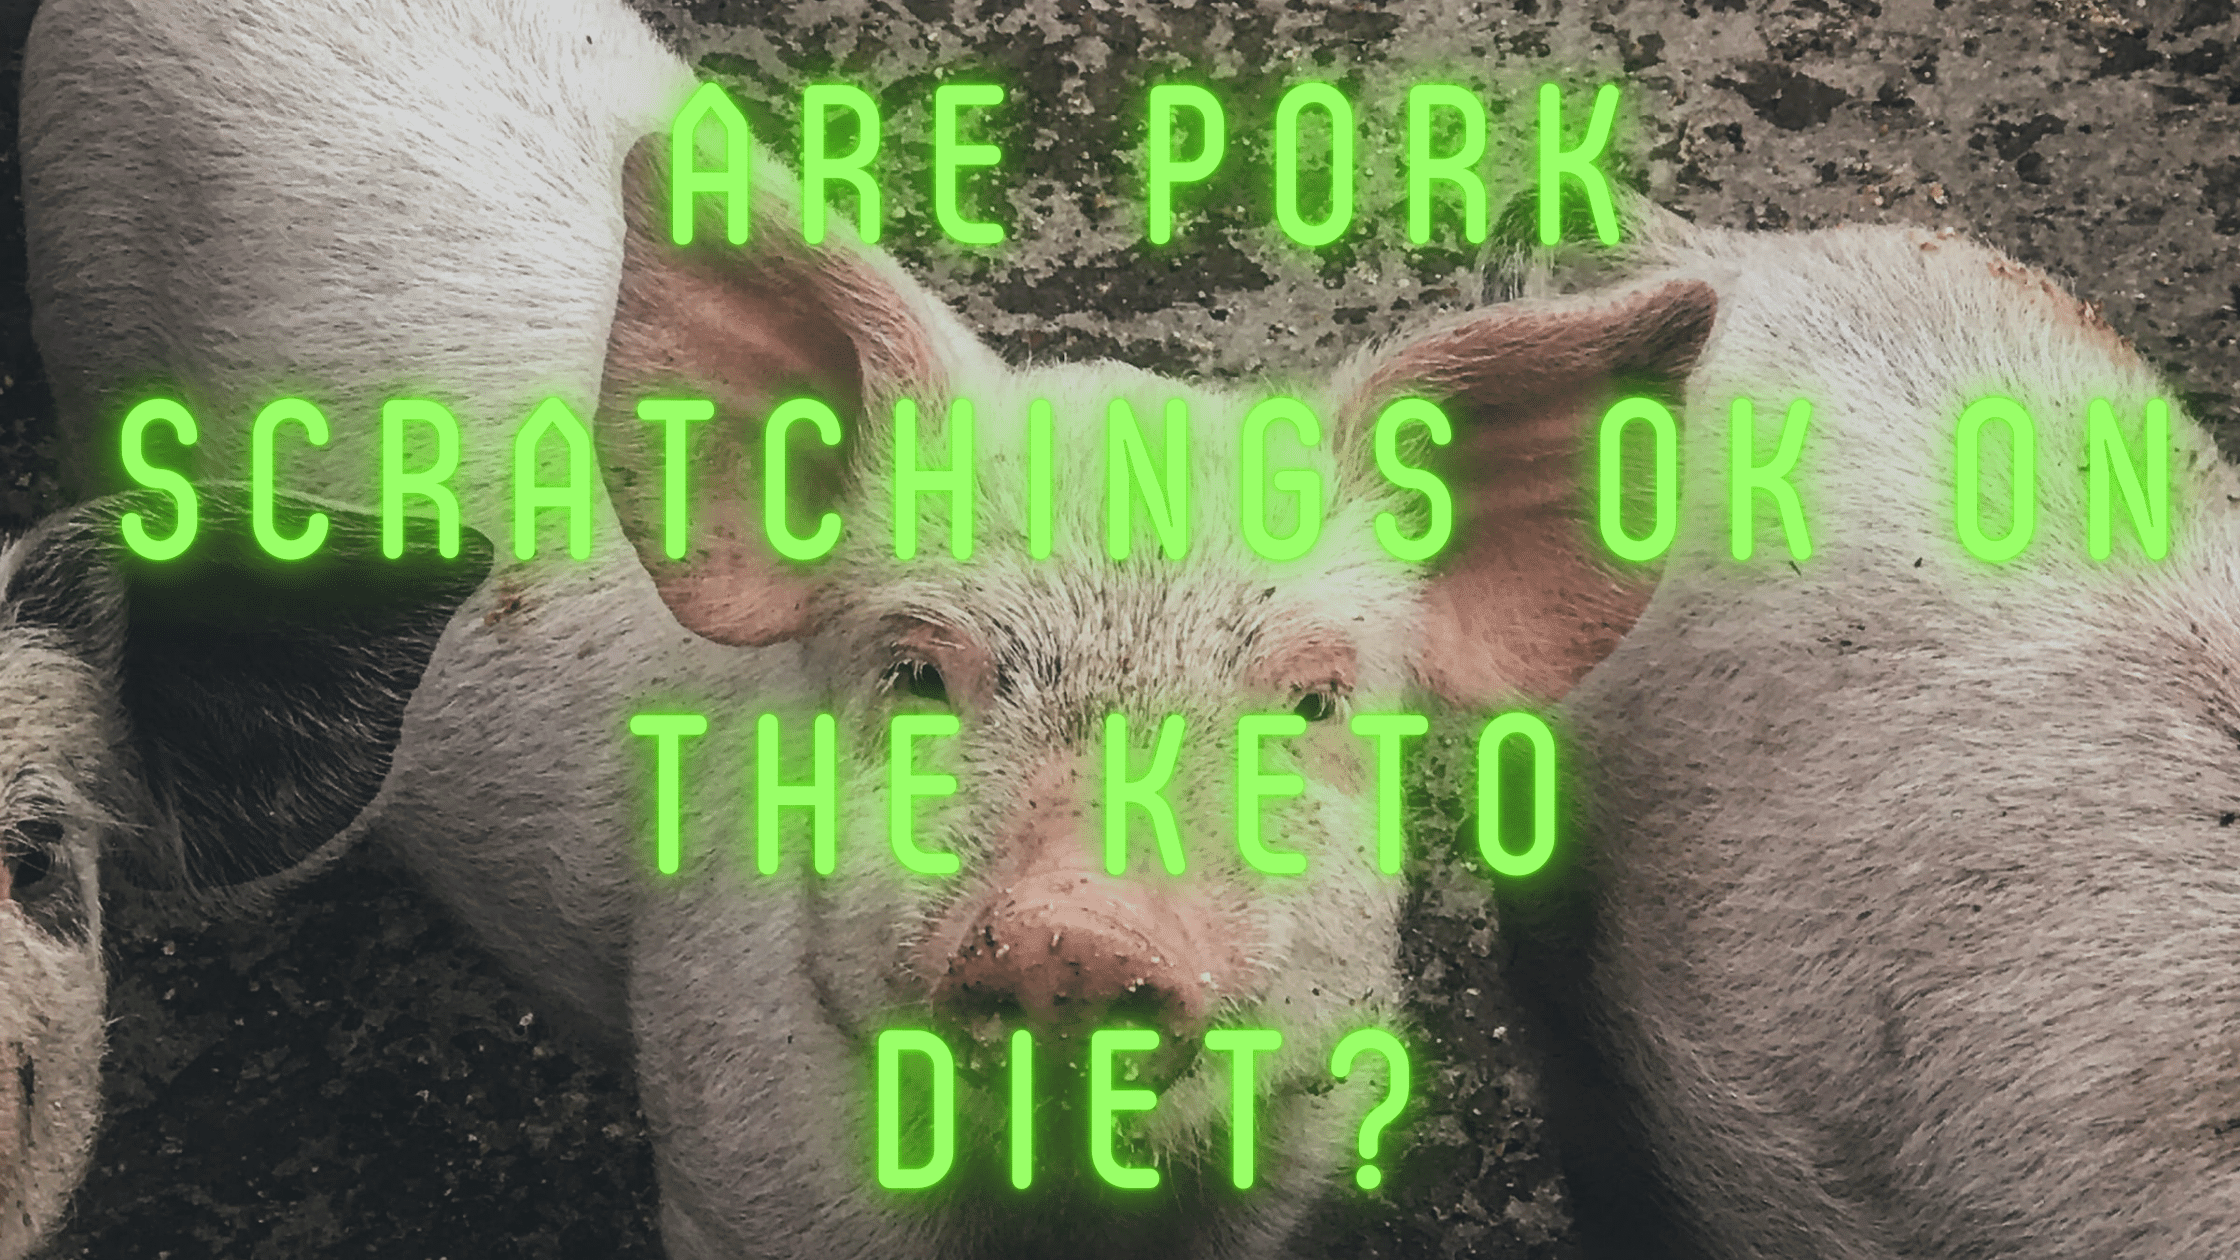 Are Pork Scratchings OK on the keto diet?